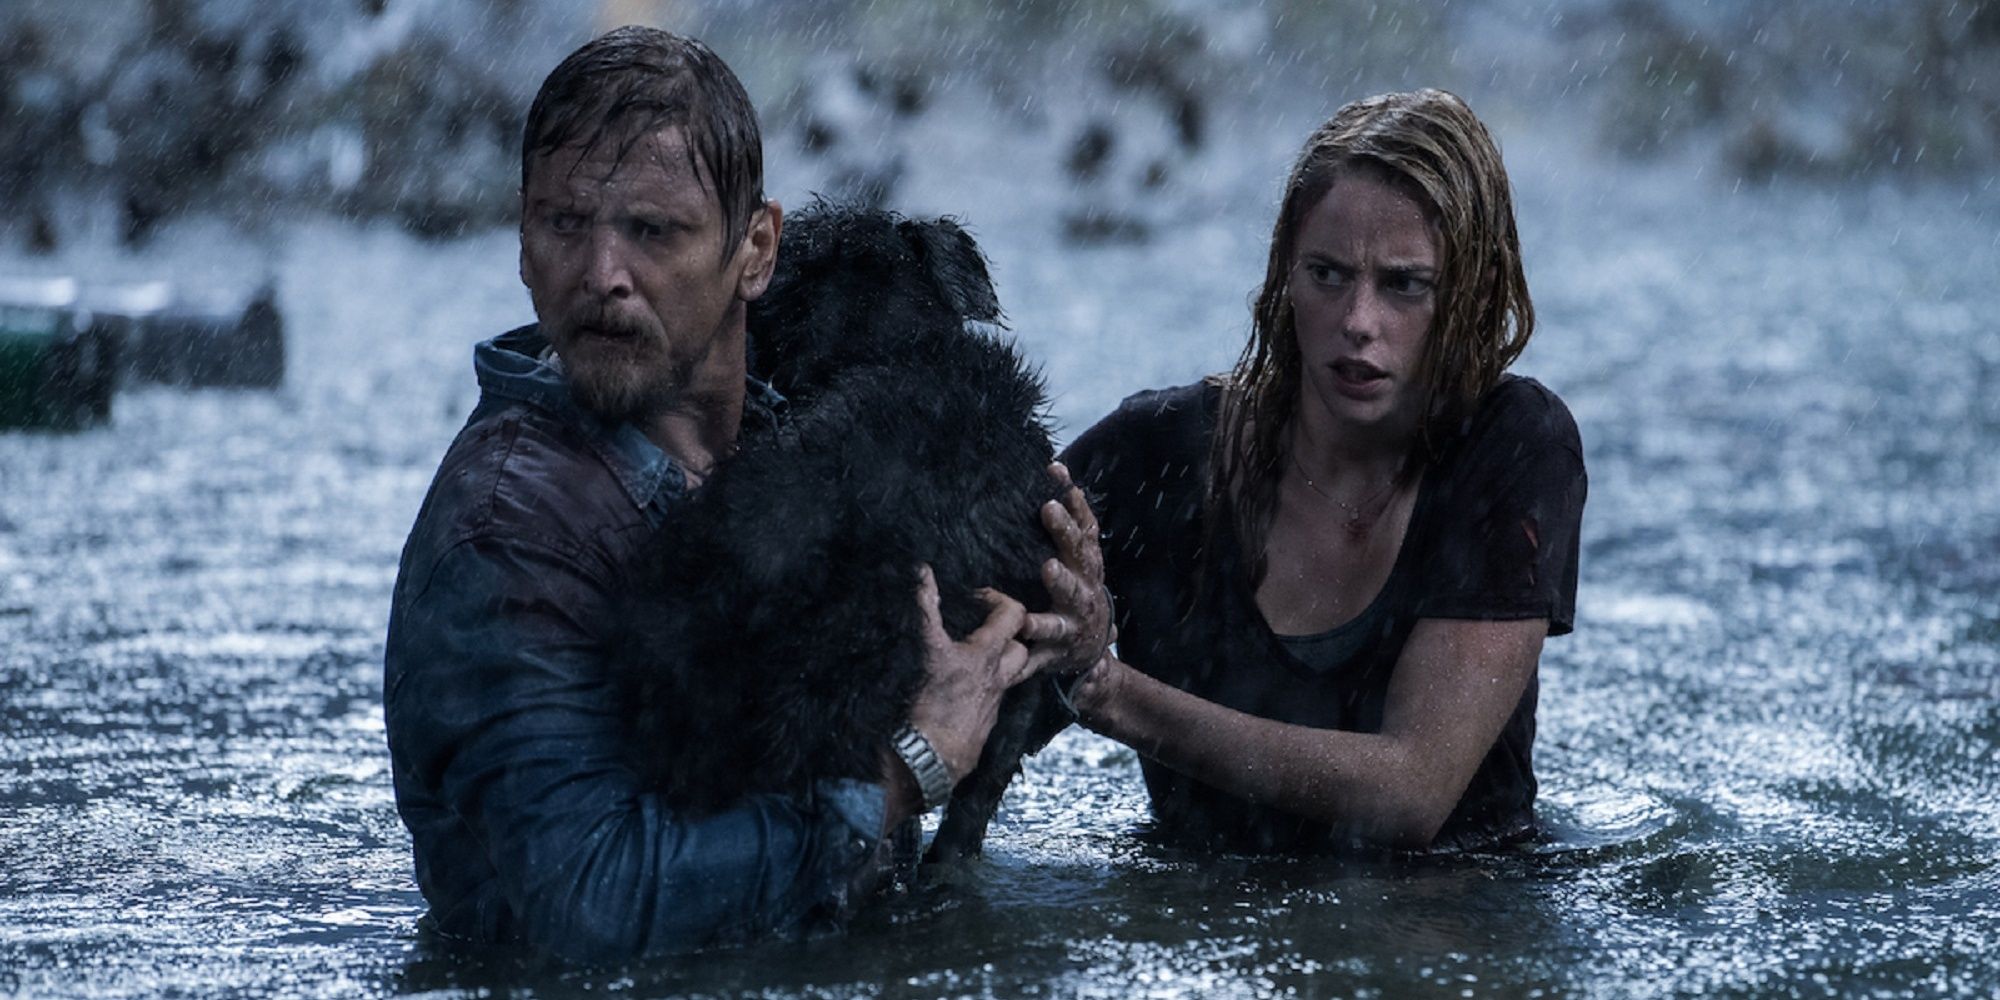 The dog, Sugar, being rescued by her family in the hurricane waters in 'Crawl.'